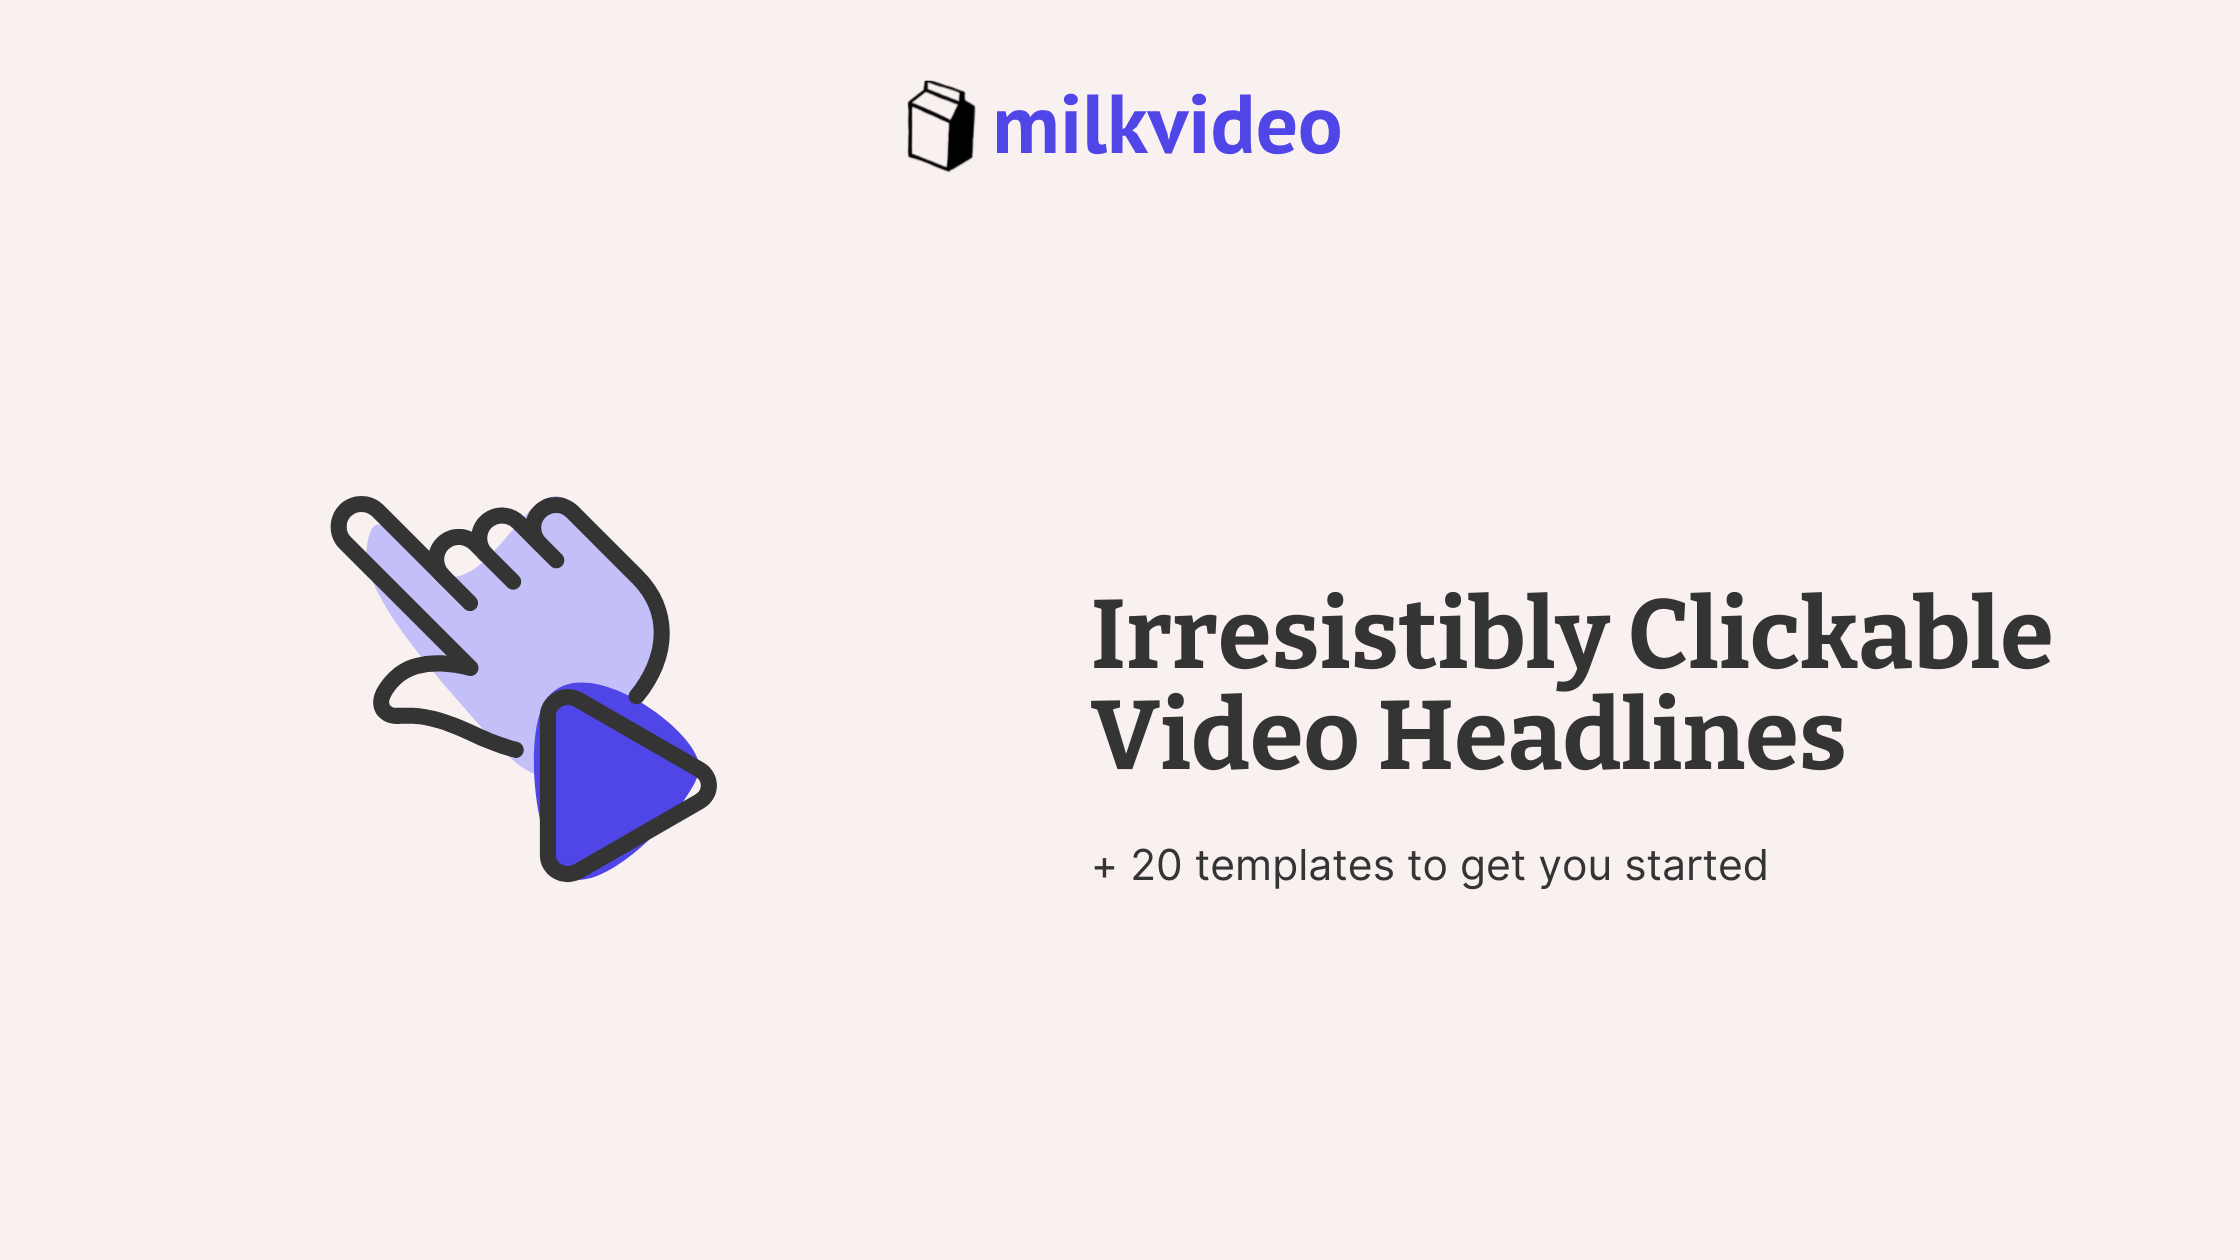 Increase Views on Your Videos with These 20 Headline Templates